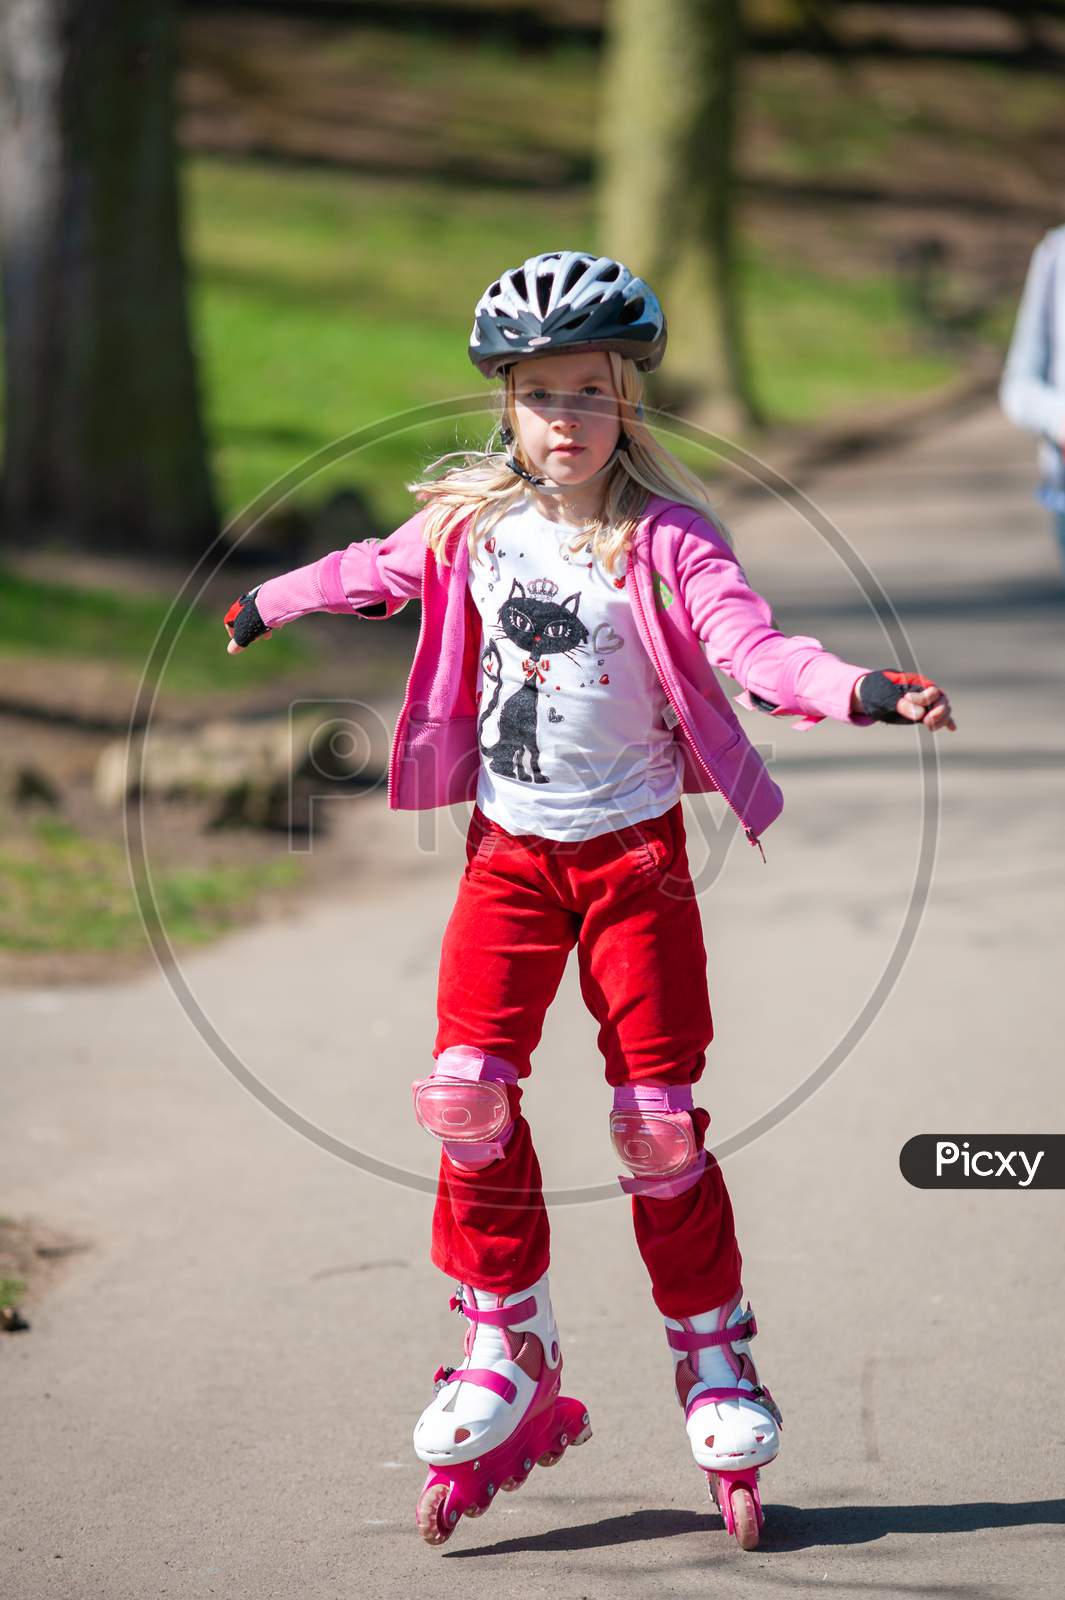 A Young Girl On Roller Blades Wearing Protective Equipment